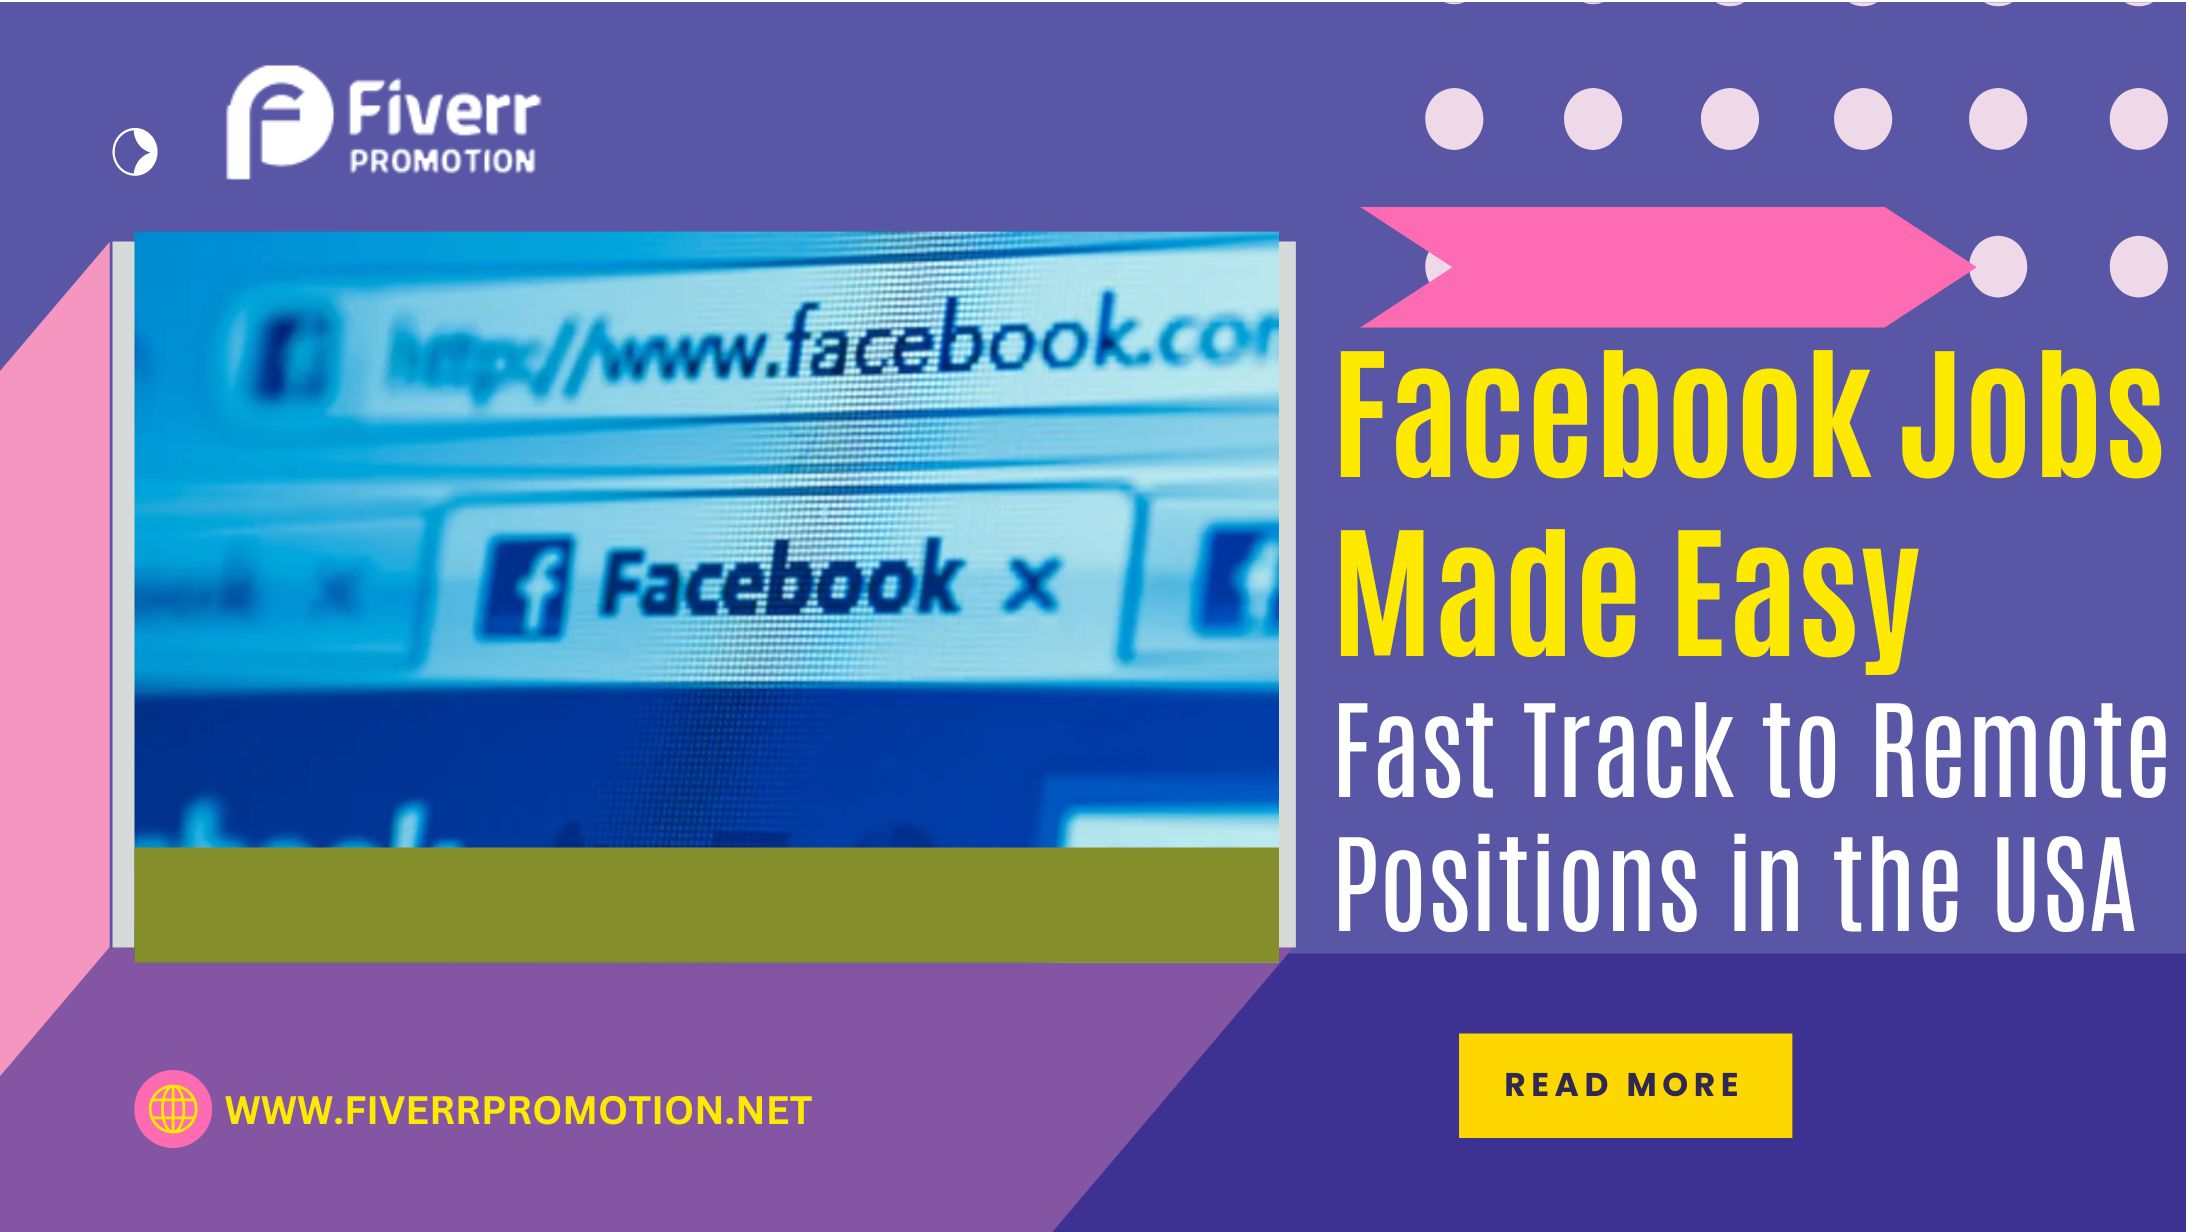 Facebook Jobs Made Easy: Fast Track to Remote Positions in the USA